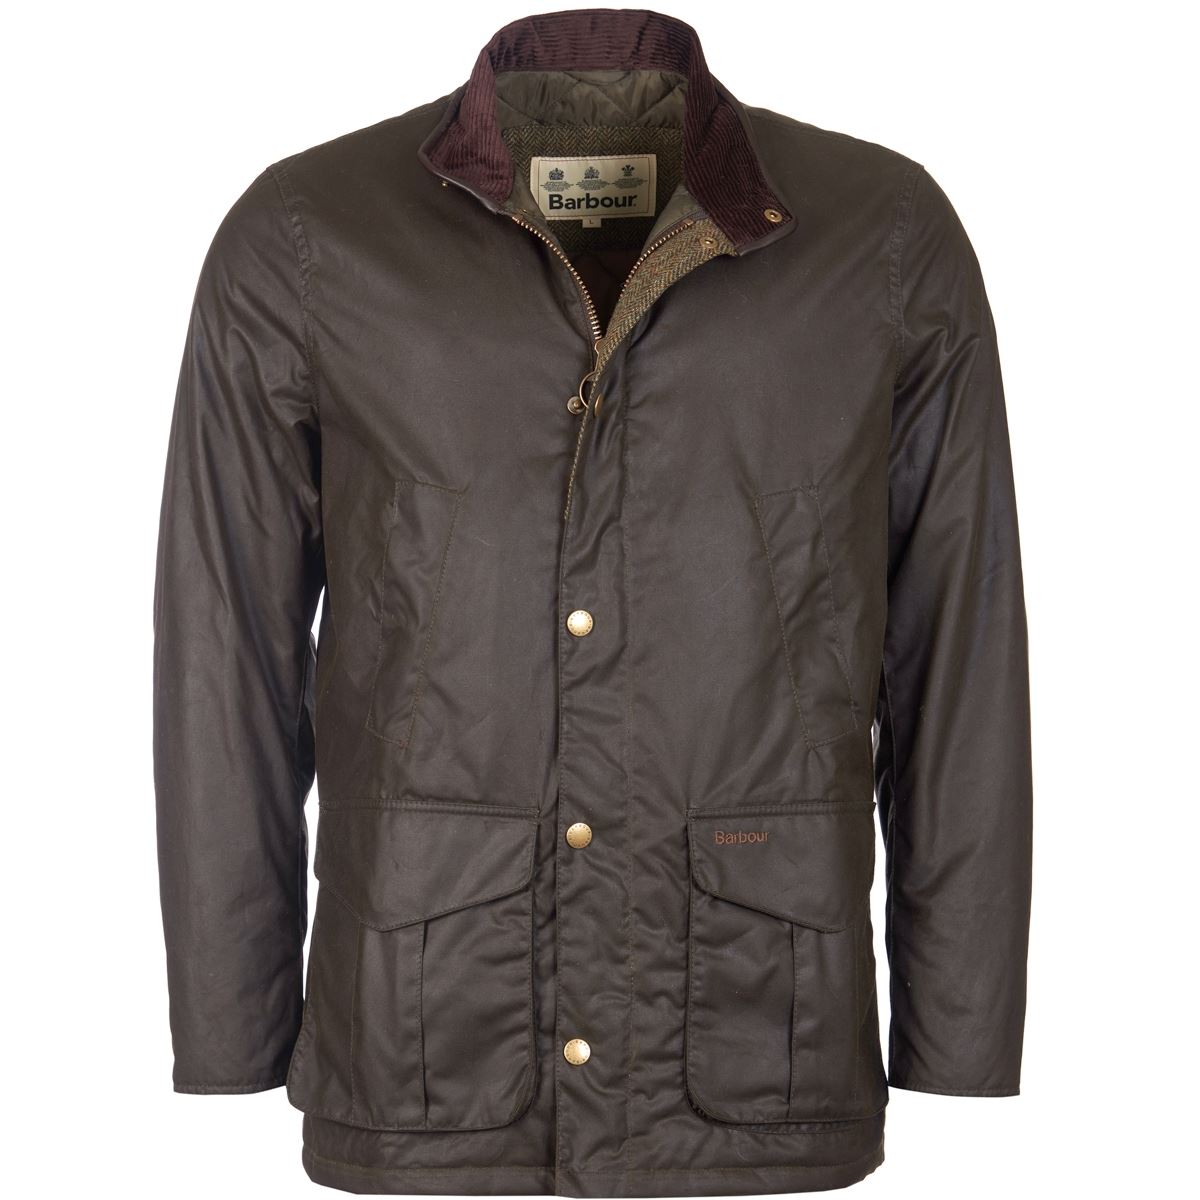 What material is the outer layer of the Barbour Hereford Wax Jacket made of?